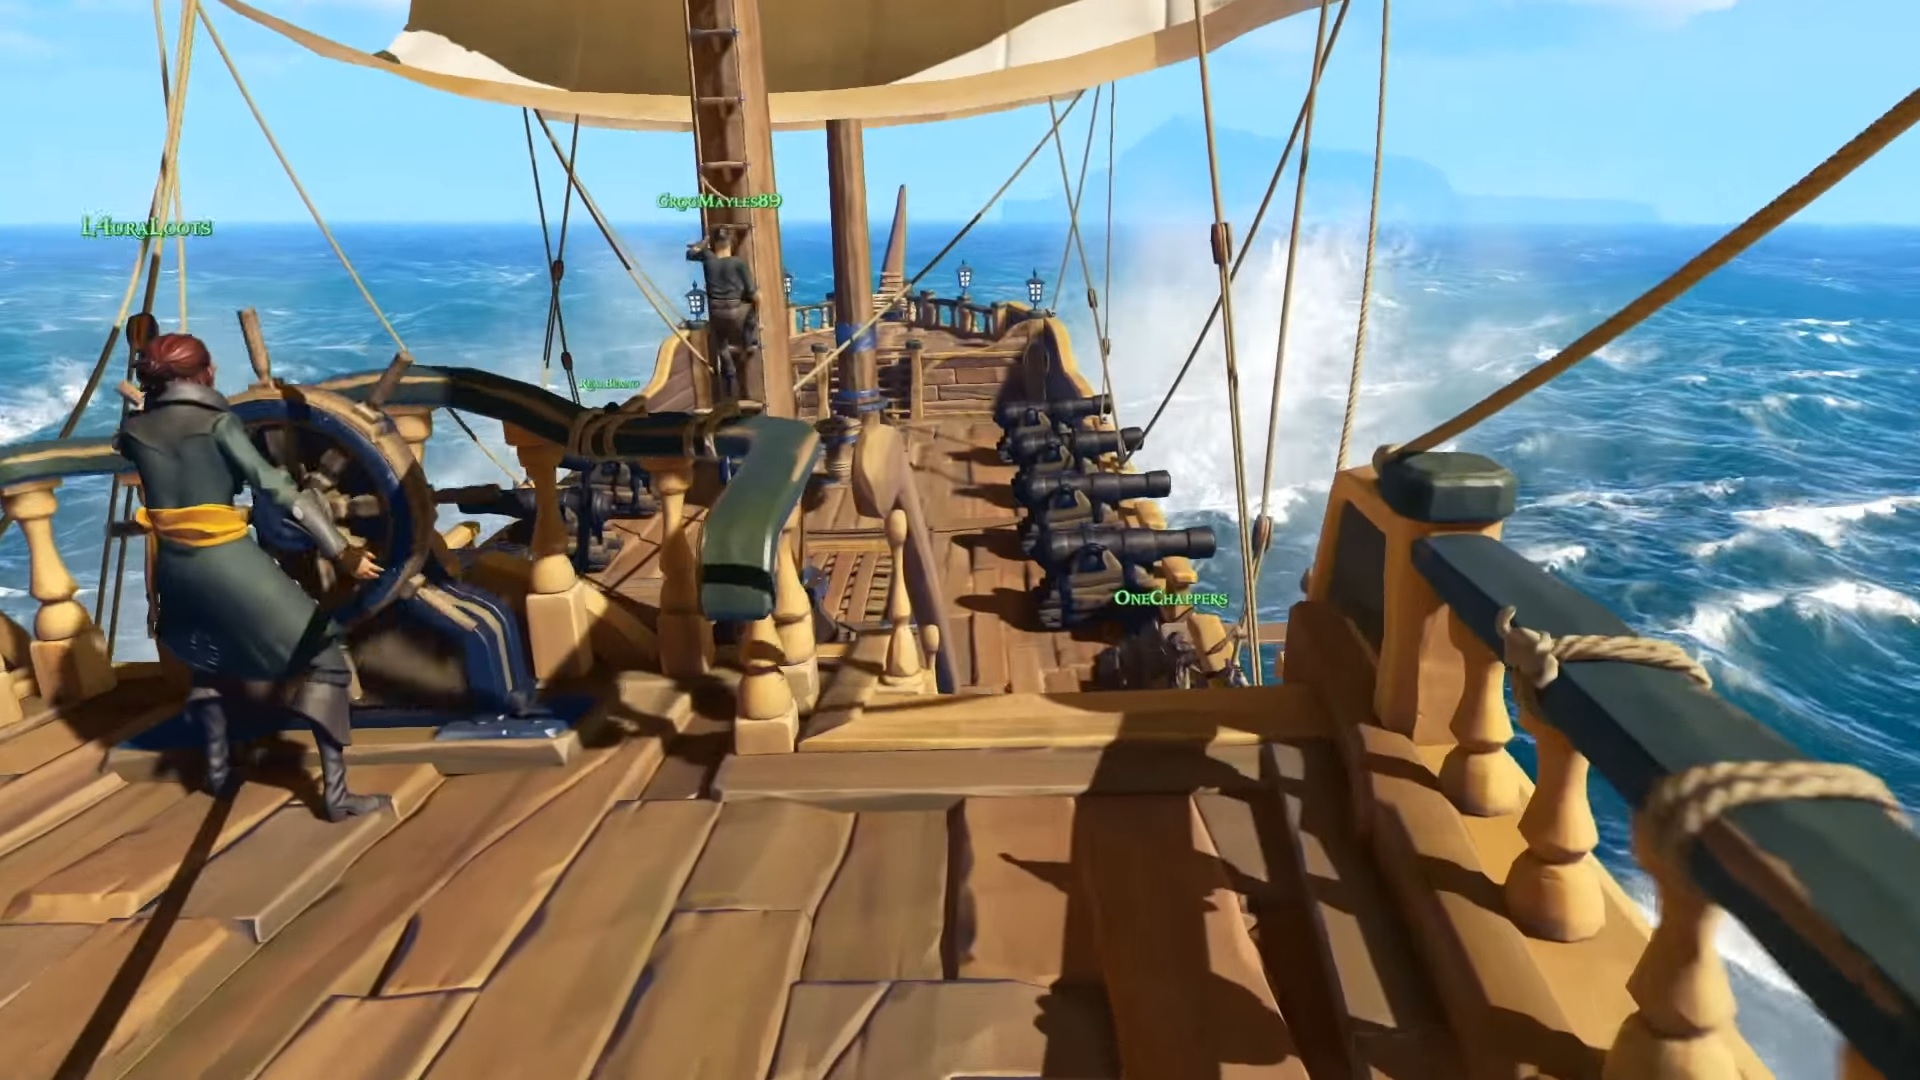 Sea of Thieves Update is live now